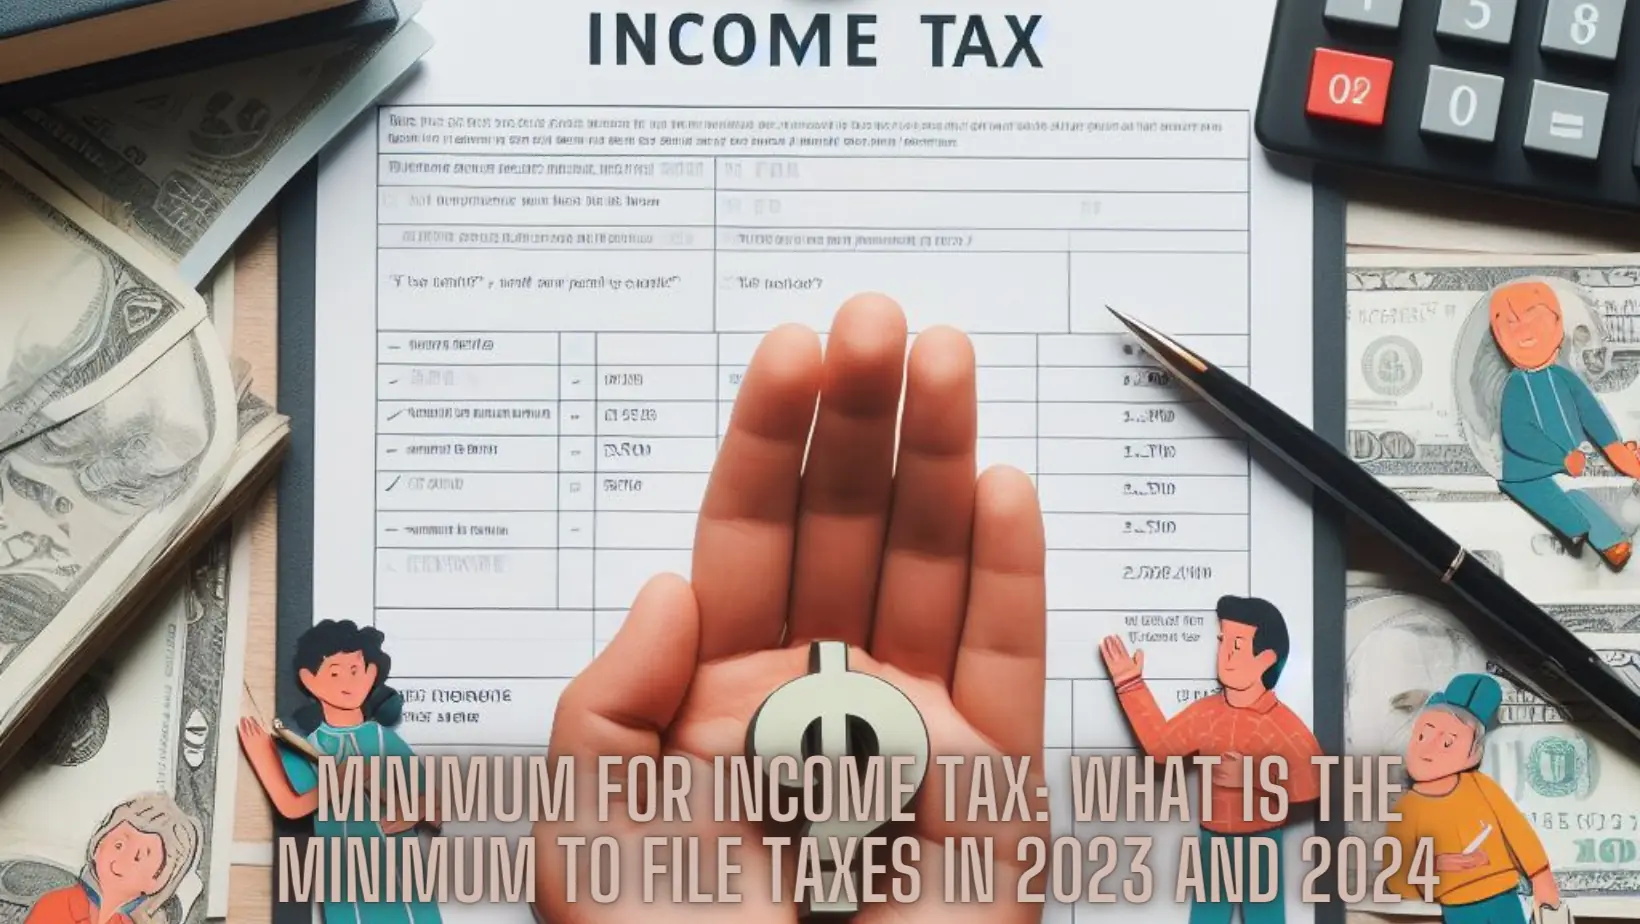 Minimum for tax what is the minimum to file taxes in 2023 and